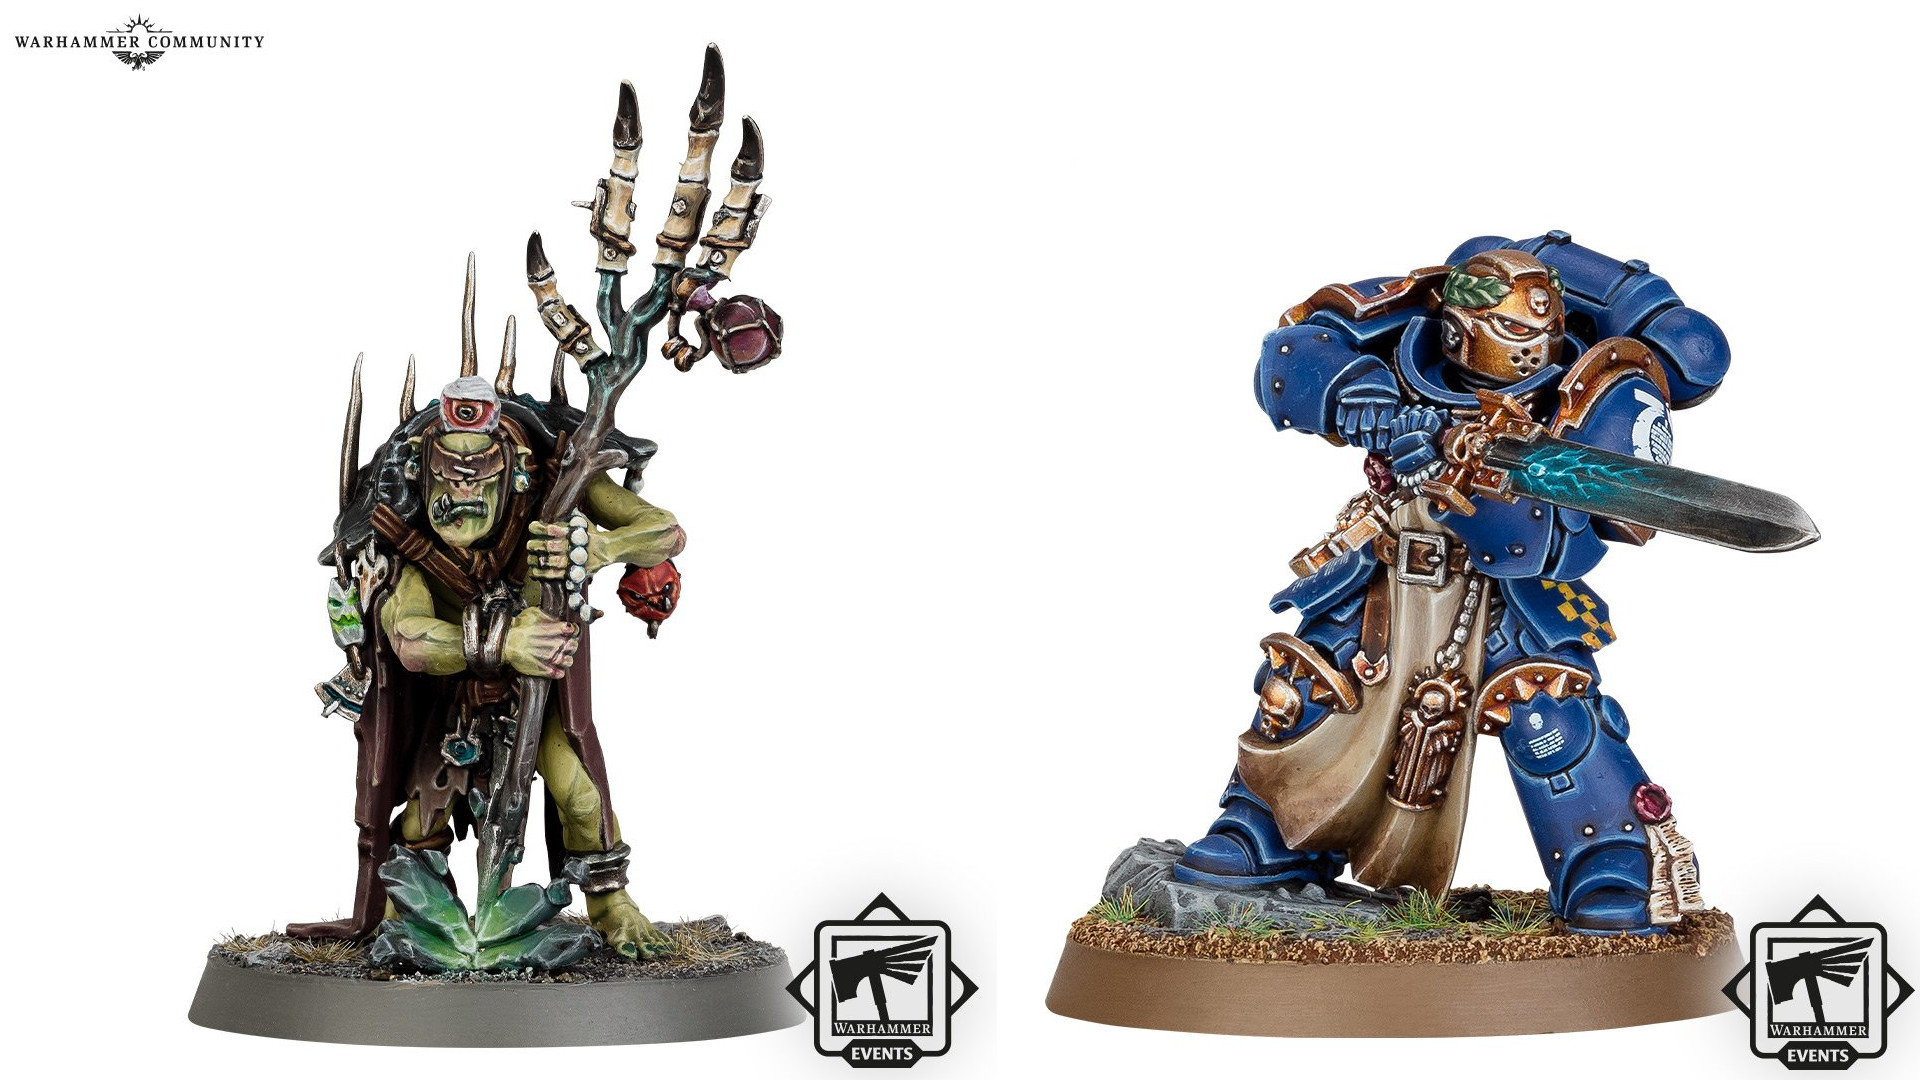 Warhammer 40k and Age of Sigmar get new event-exclusive models